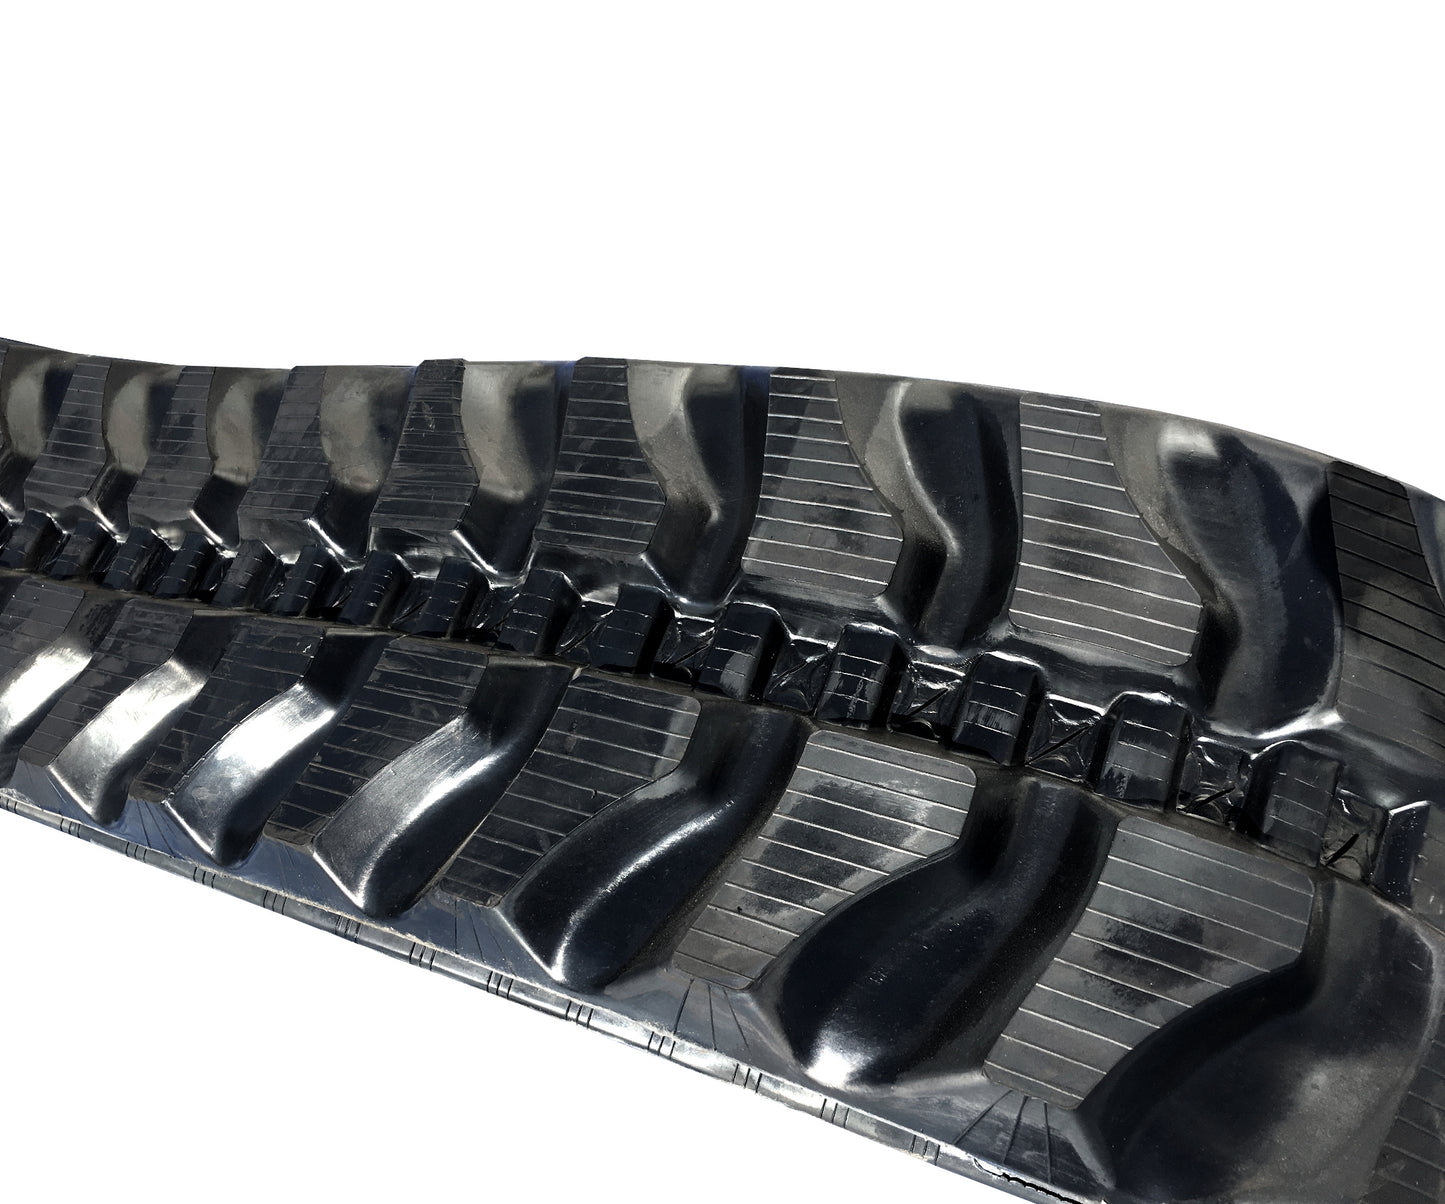 300 x 52.5 x 84 Rubber Track for Case, GEHL, IHI, JCB, Mustang, and other Excavators